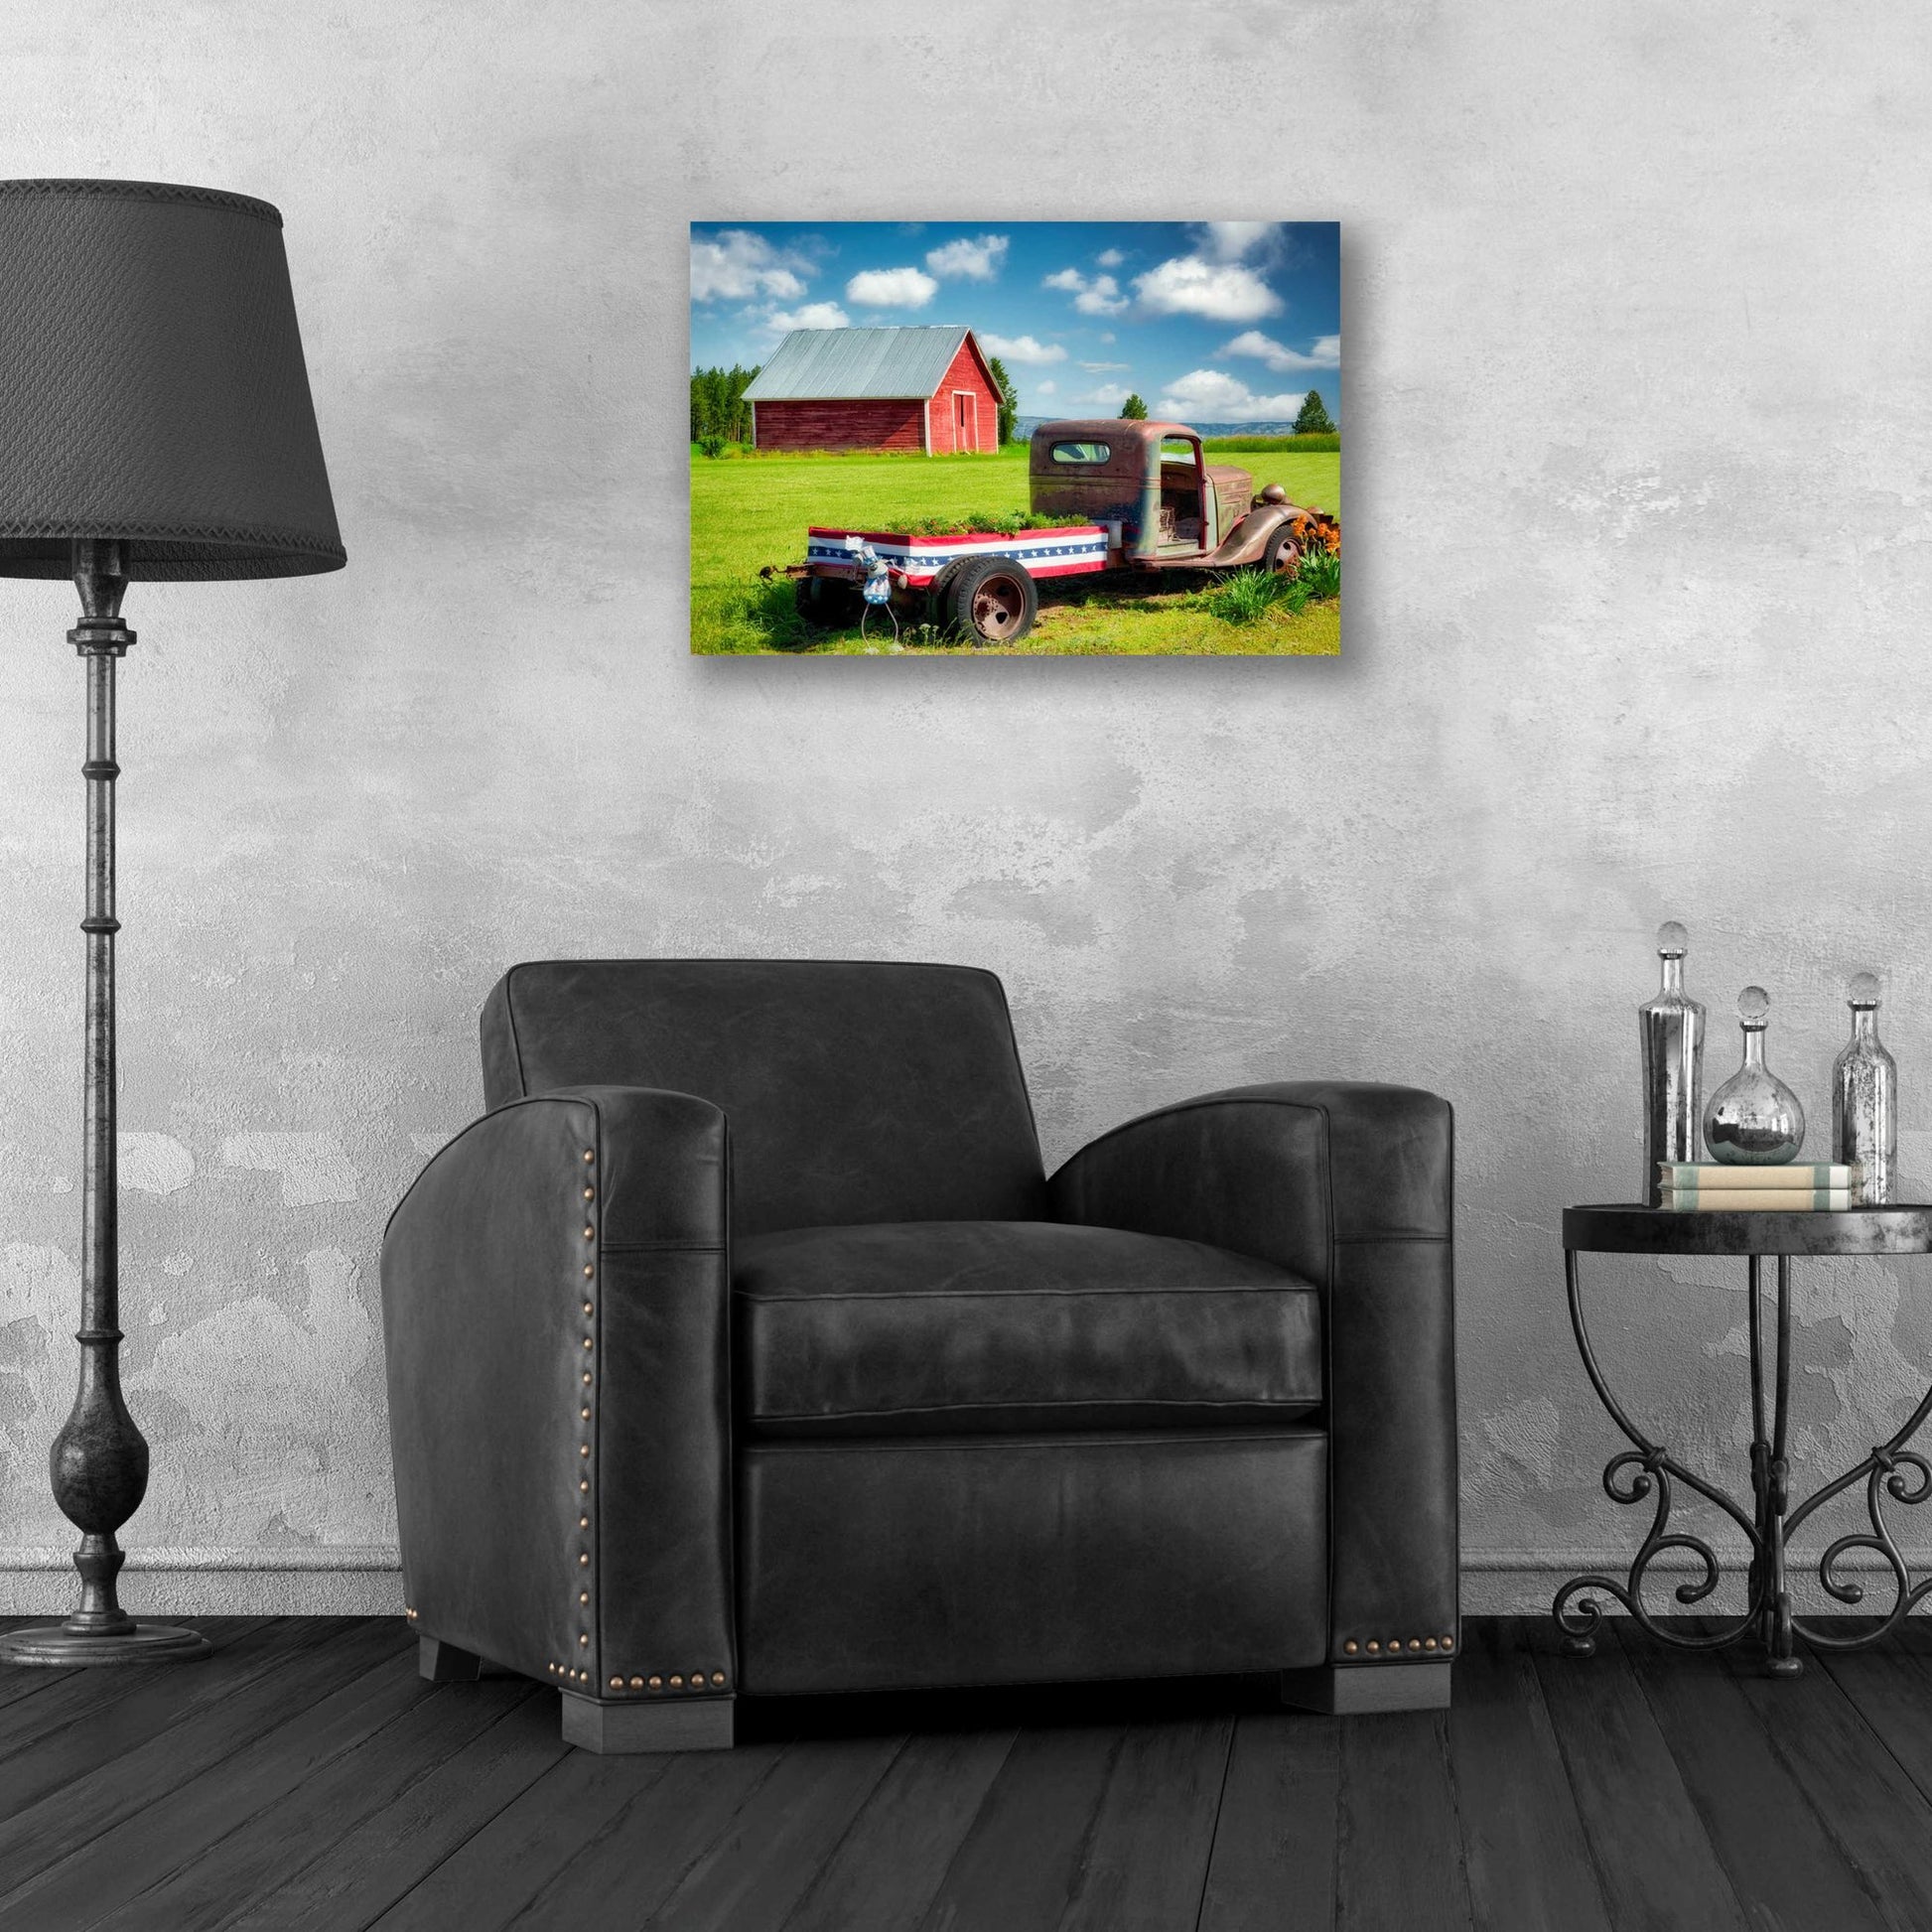 Epic Art 'Barn and Truck' by Dennis Frates, Acrylic Glass Wall Art,24x16